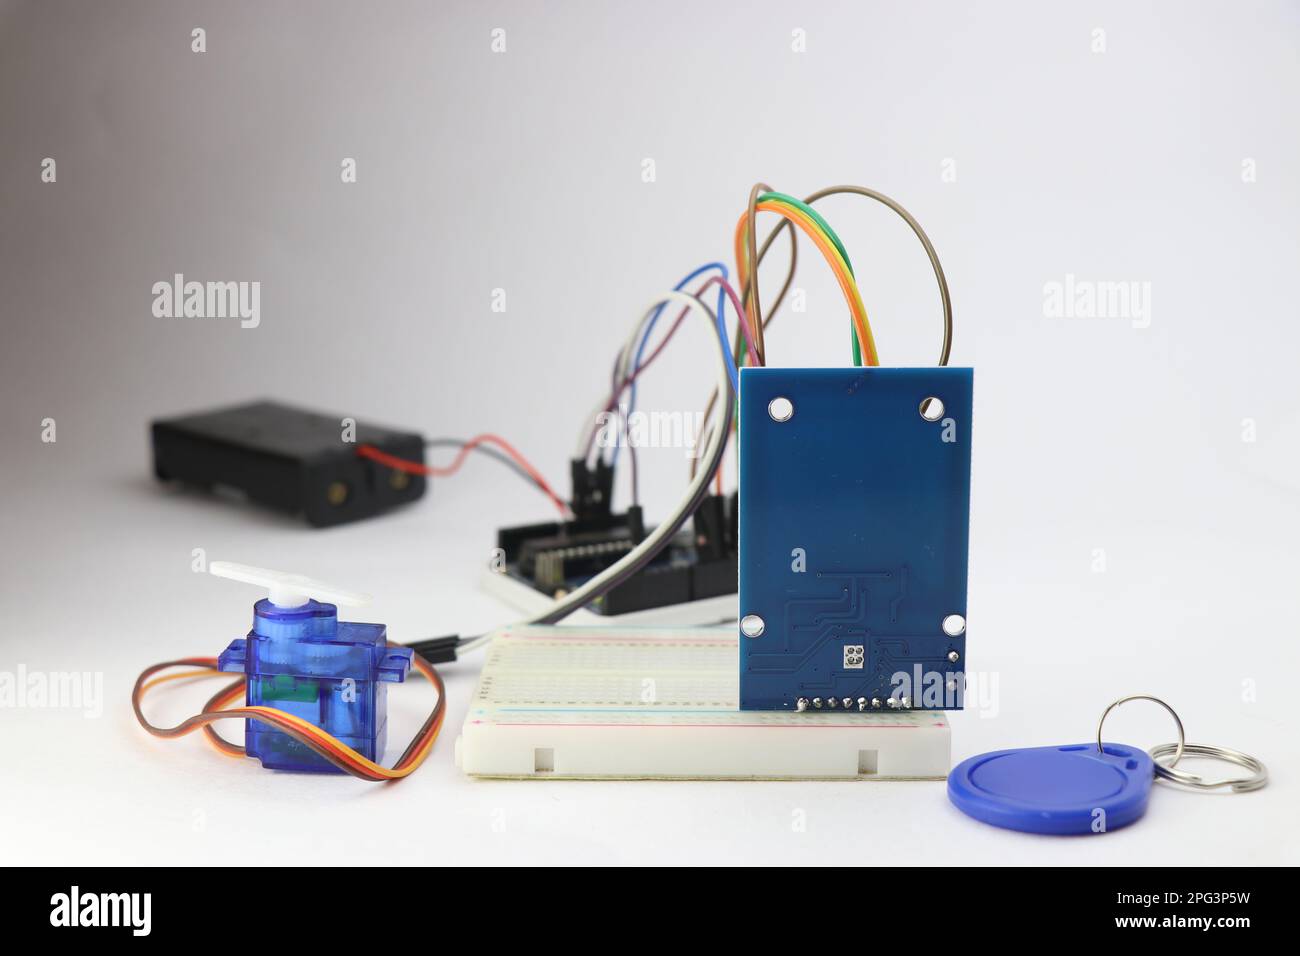 RFID module with tag, Micro servo and other electronic components connected with a breadboard. Electronic projects with cables and breadboard Stock Photo